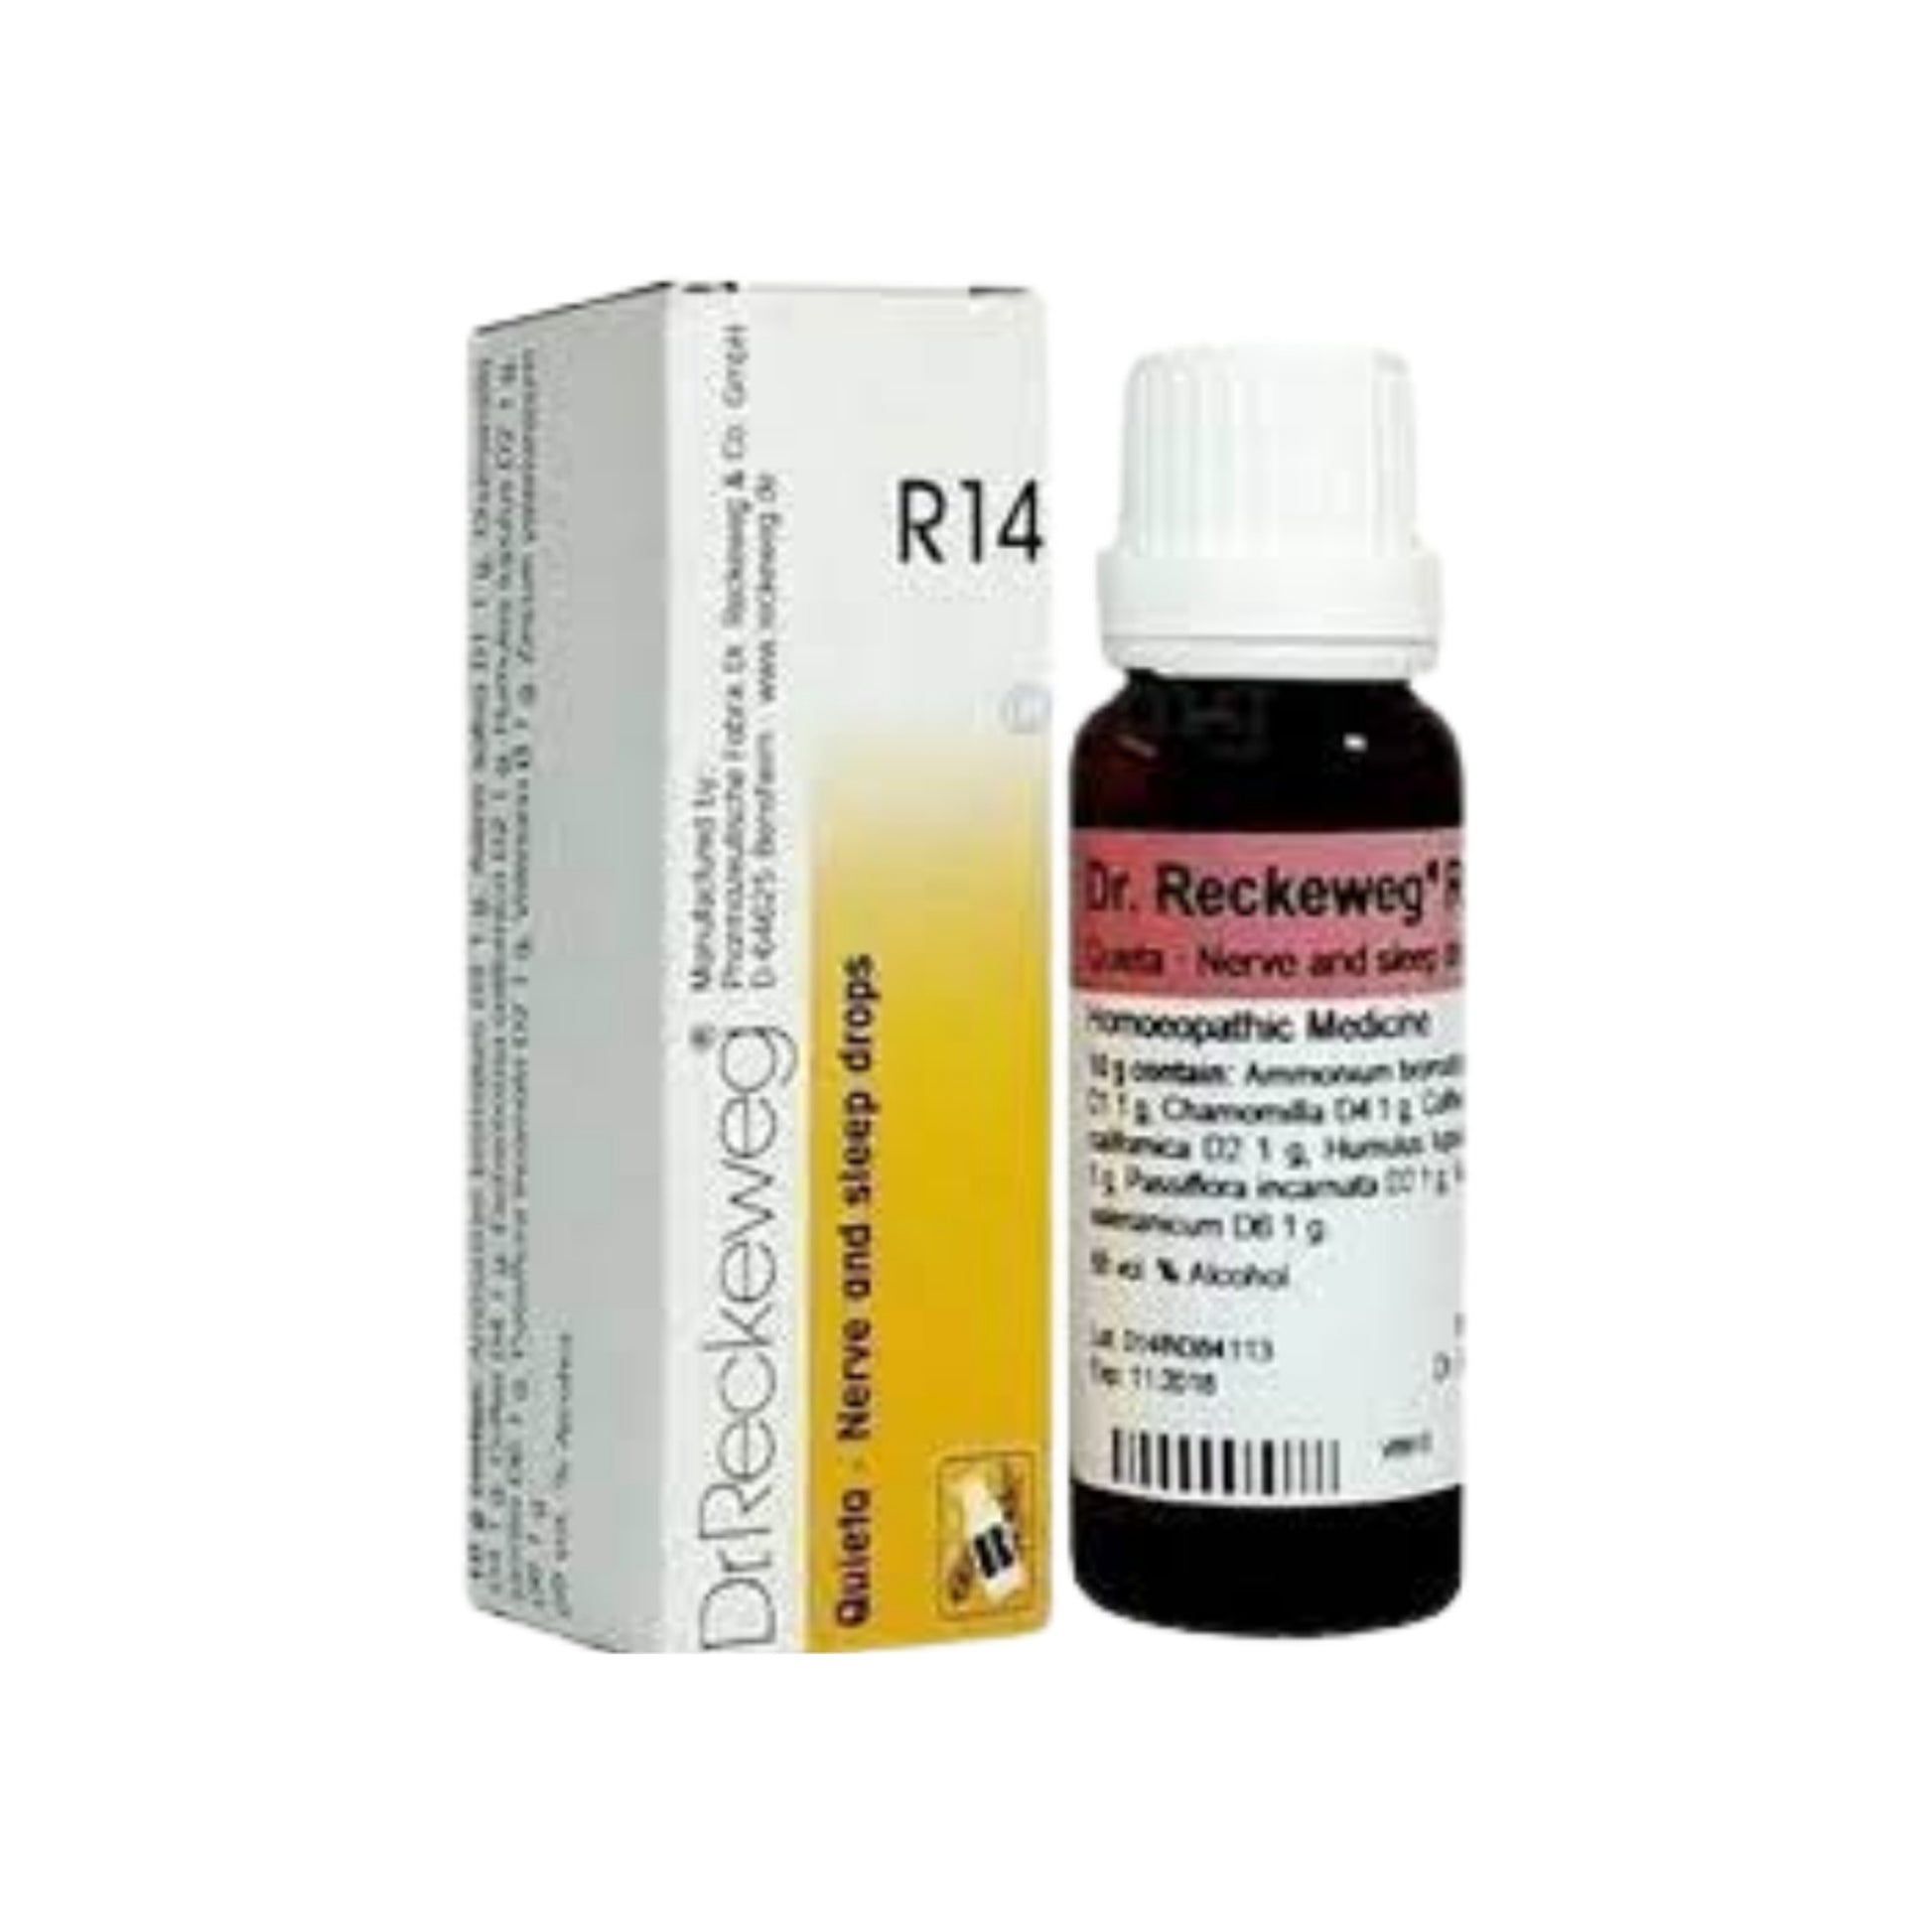 Image for DR. RECKEWEG R14 - Nerve and Sleep Drops 22 ml: Homeopathic solution for insomnia, sleep disturbances, and nervous restlessness.